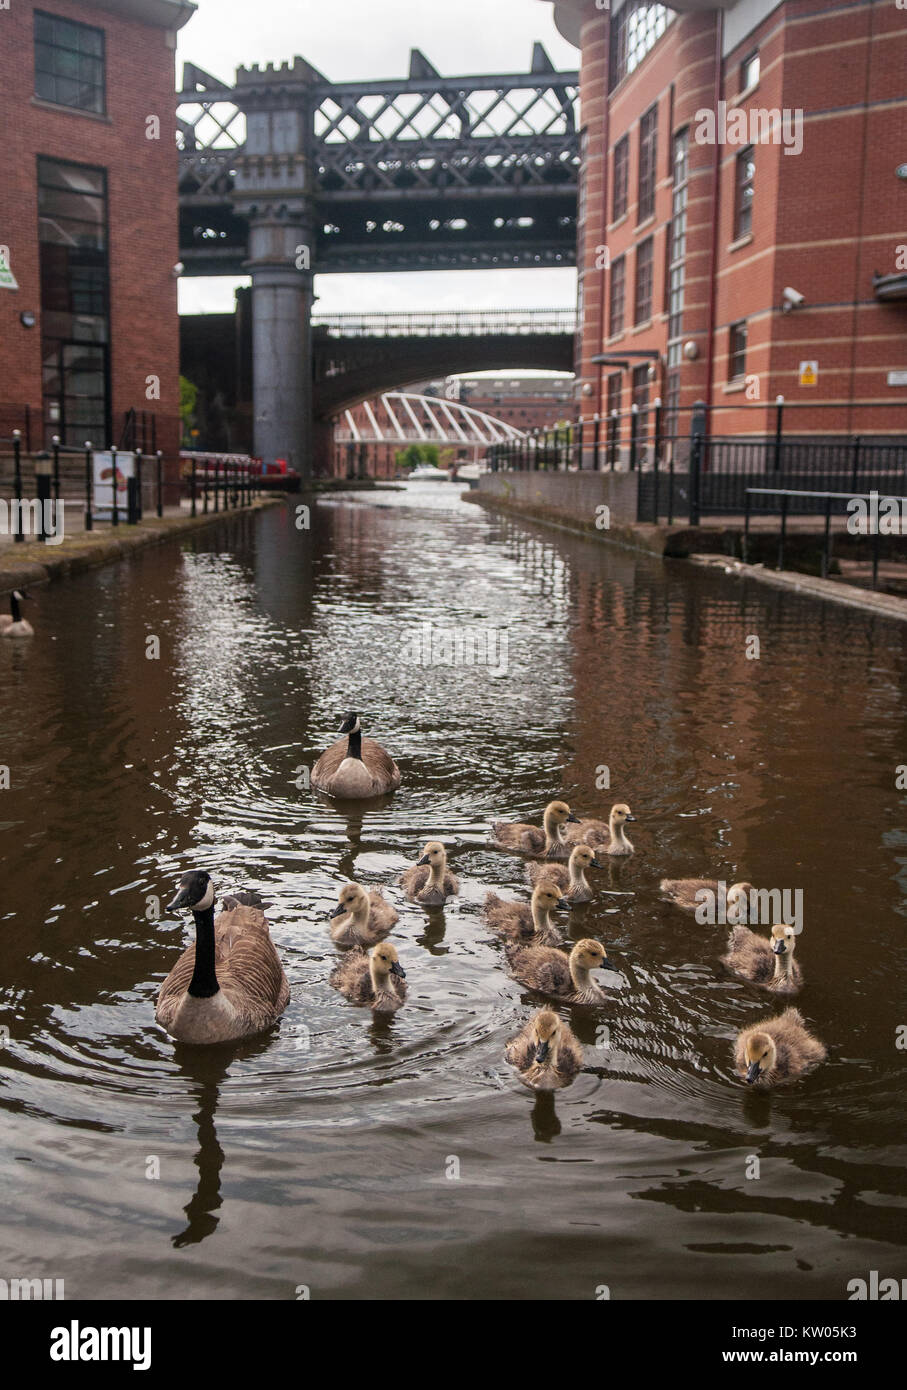 A family of geese and goslings swim in the canal basin at Castlefield, amongst the post-industrial cityscape of railway viaducts, warehouses and apart Stock Photo